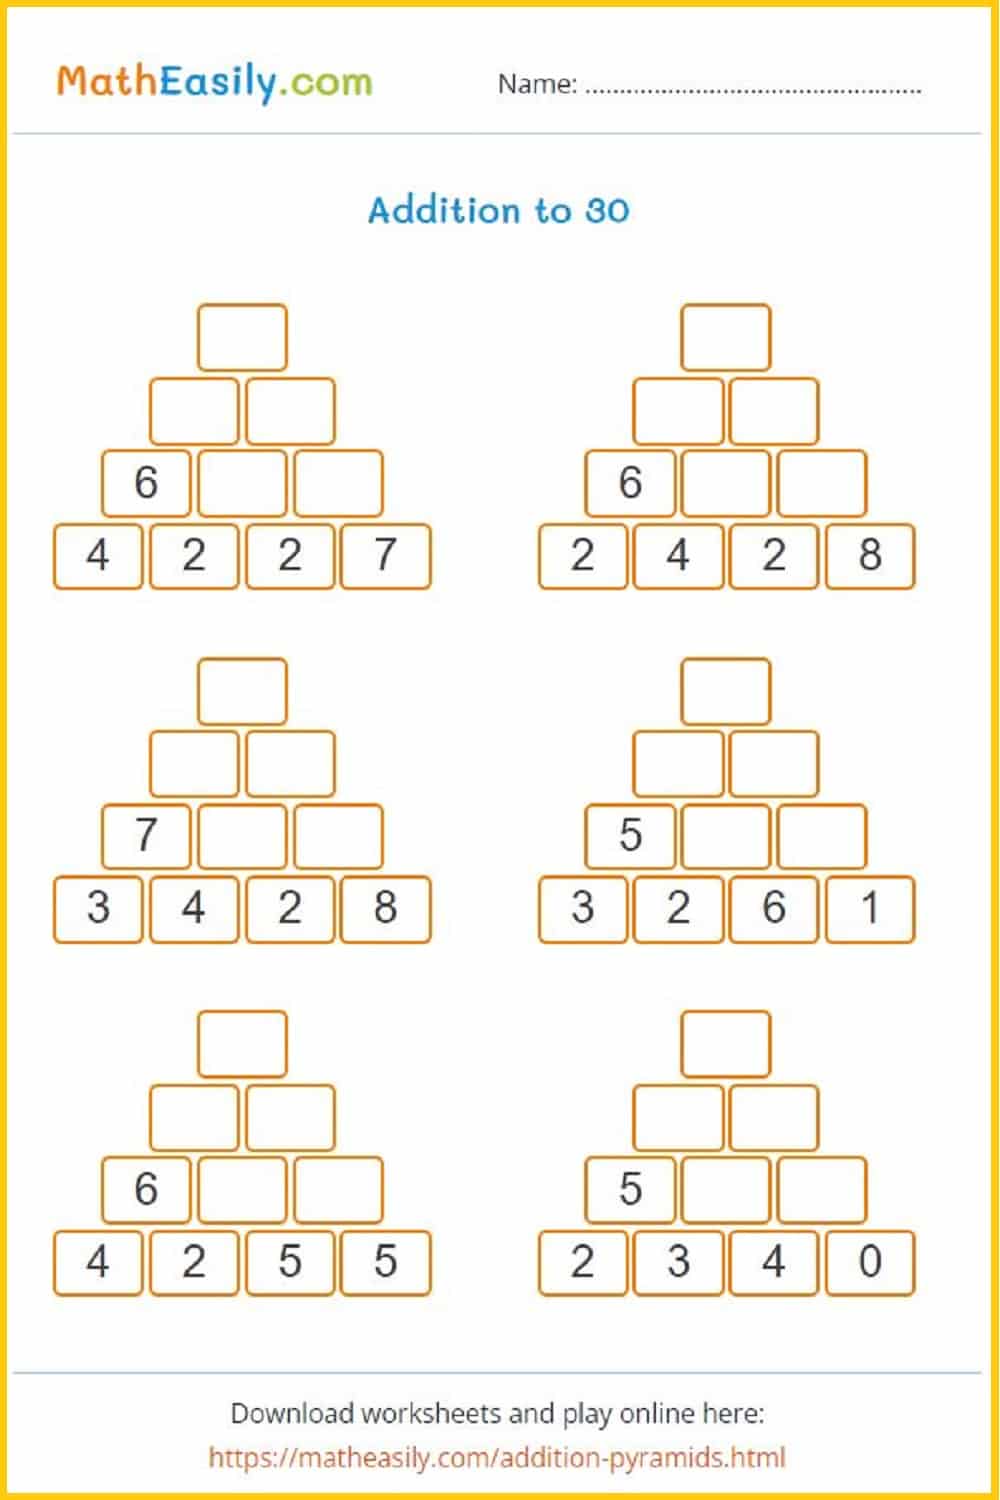 Number pyramid addition worksheets. Printable number pyramid puzzle worksheets in PDF. addition pyramids worksheet. pyramid addition puzzle.